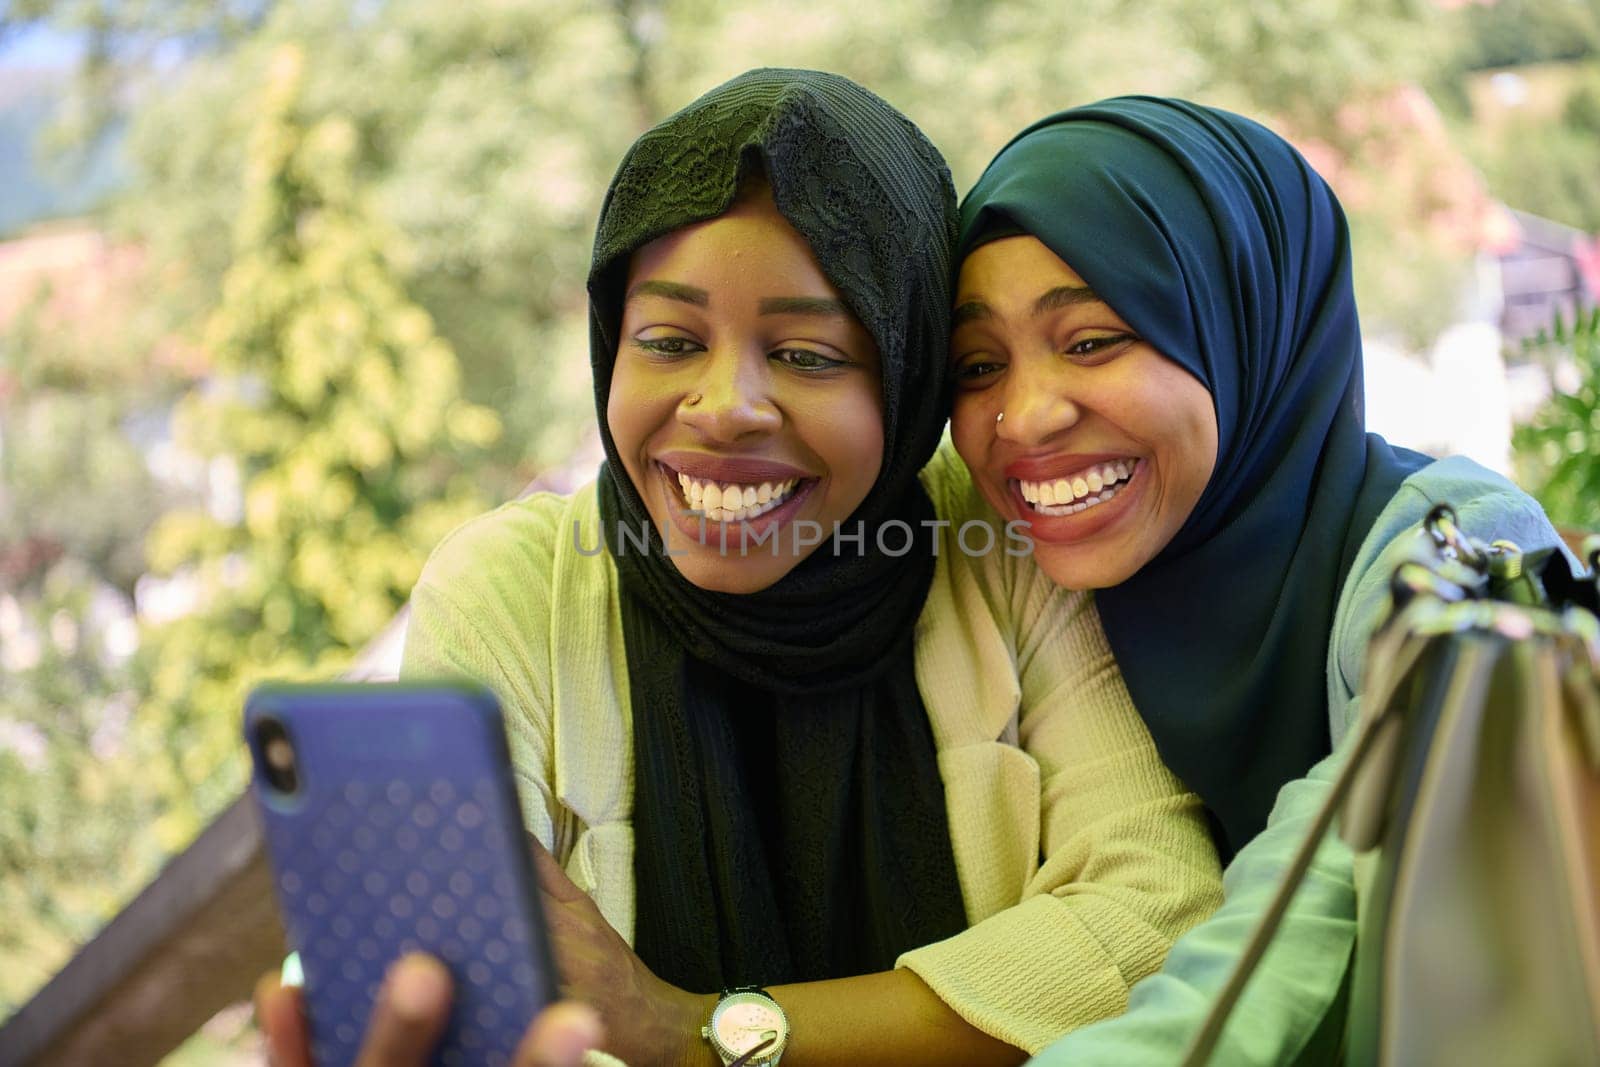 Two Middle Eastern Muslim women, adorned in hijabs, capture a moment of friendship and joy as they take selfies on a smartphone while seated in a natural setting.